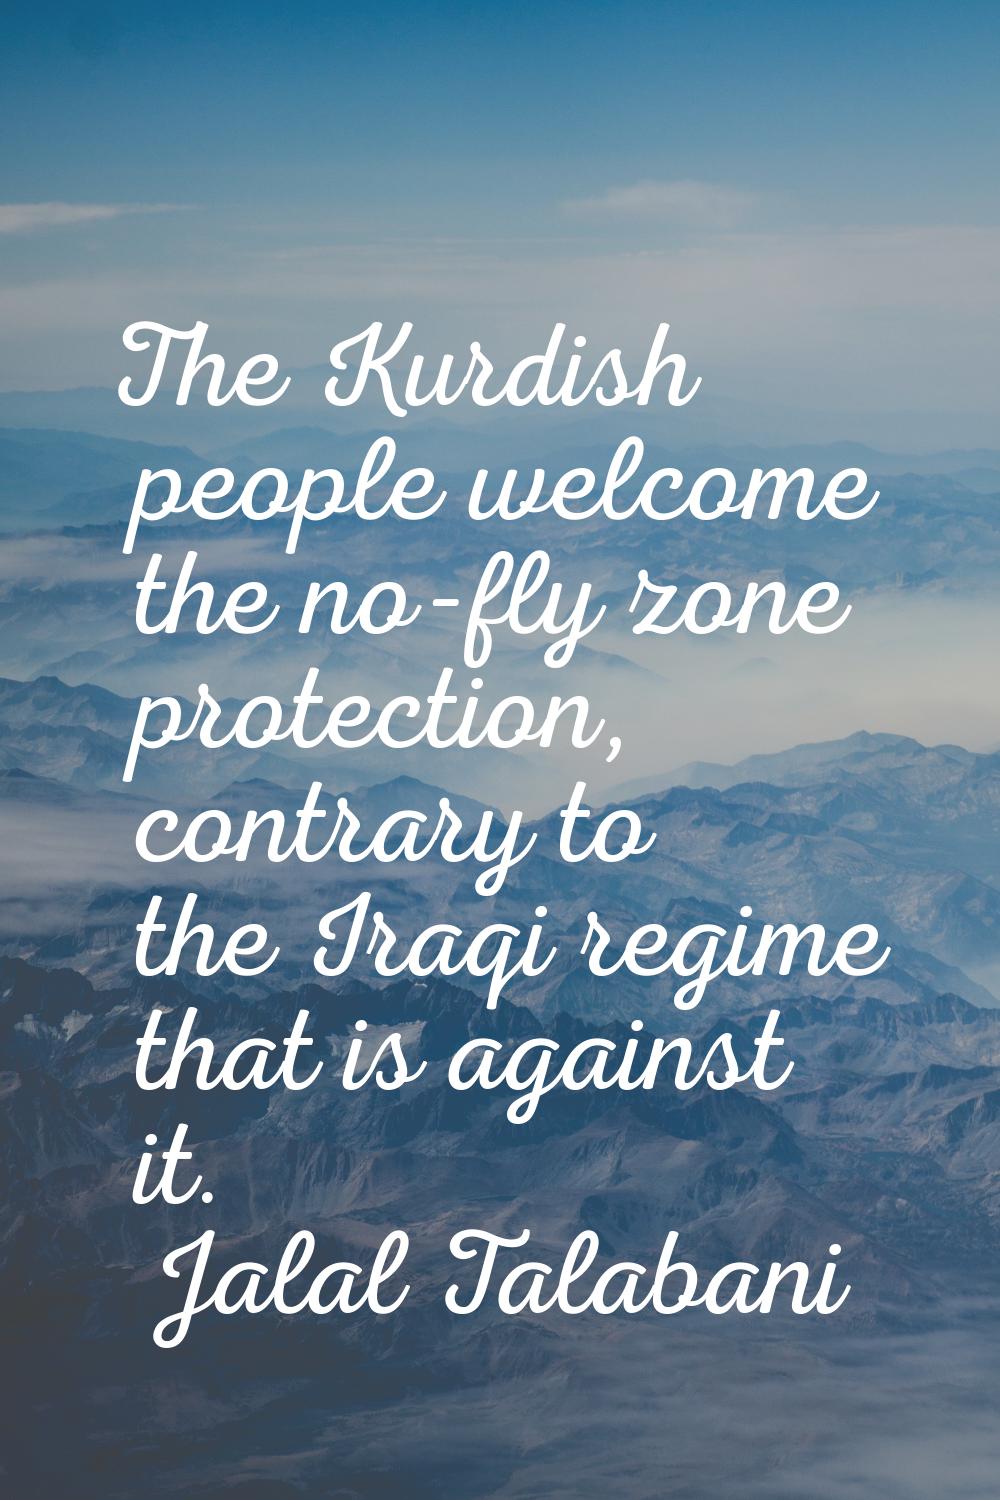 The Kurdish people welcome the no-fly zone protection, contrary to the Iraqi regime that is against